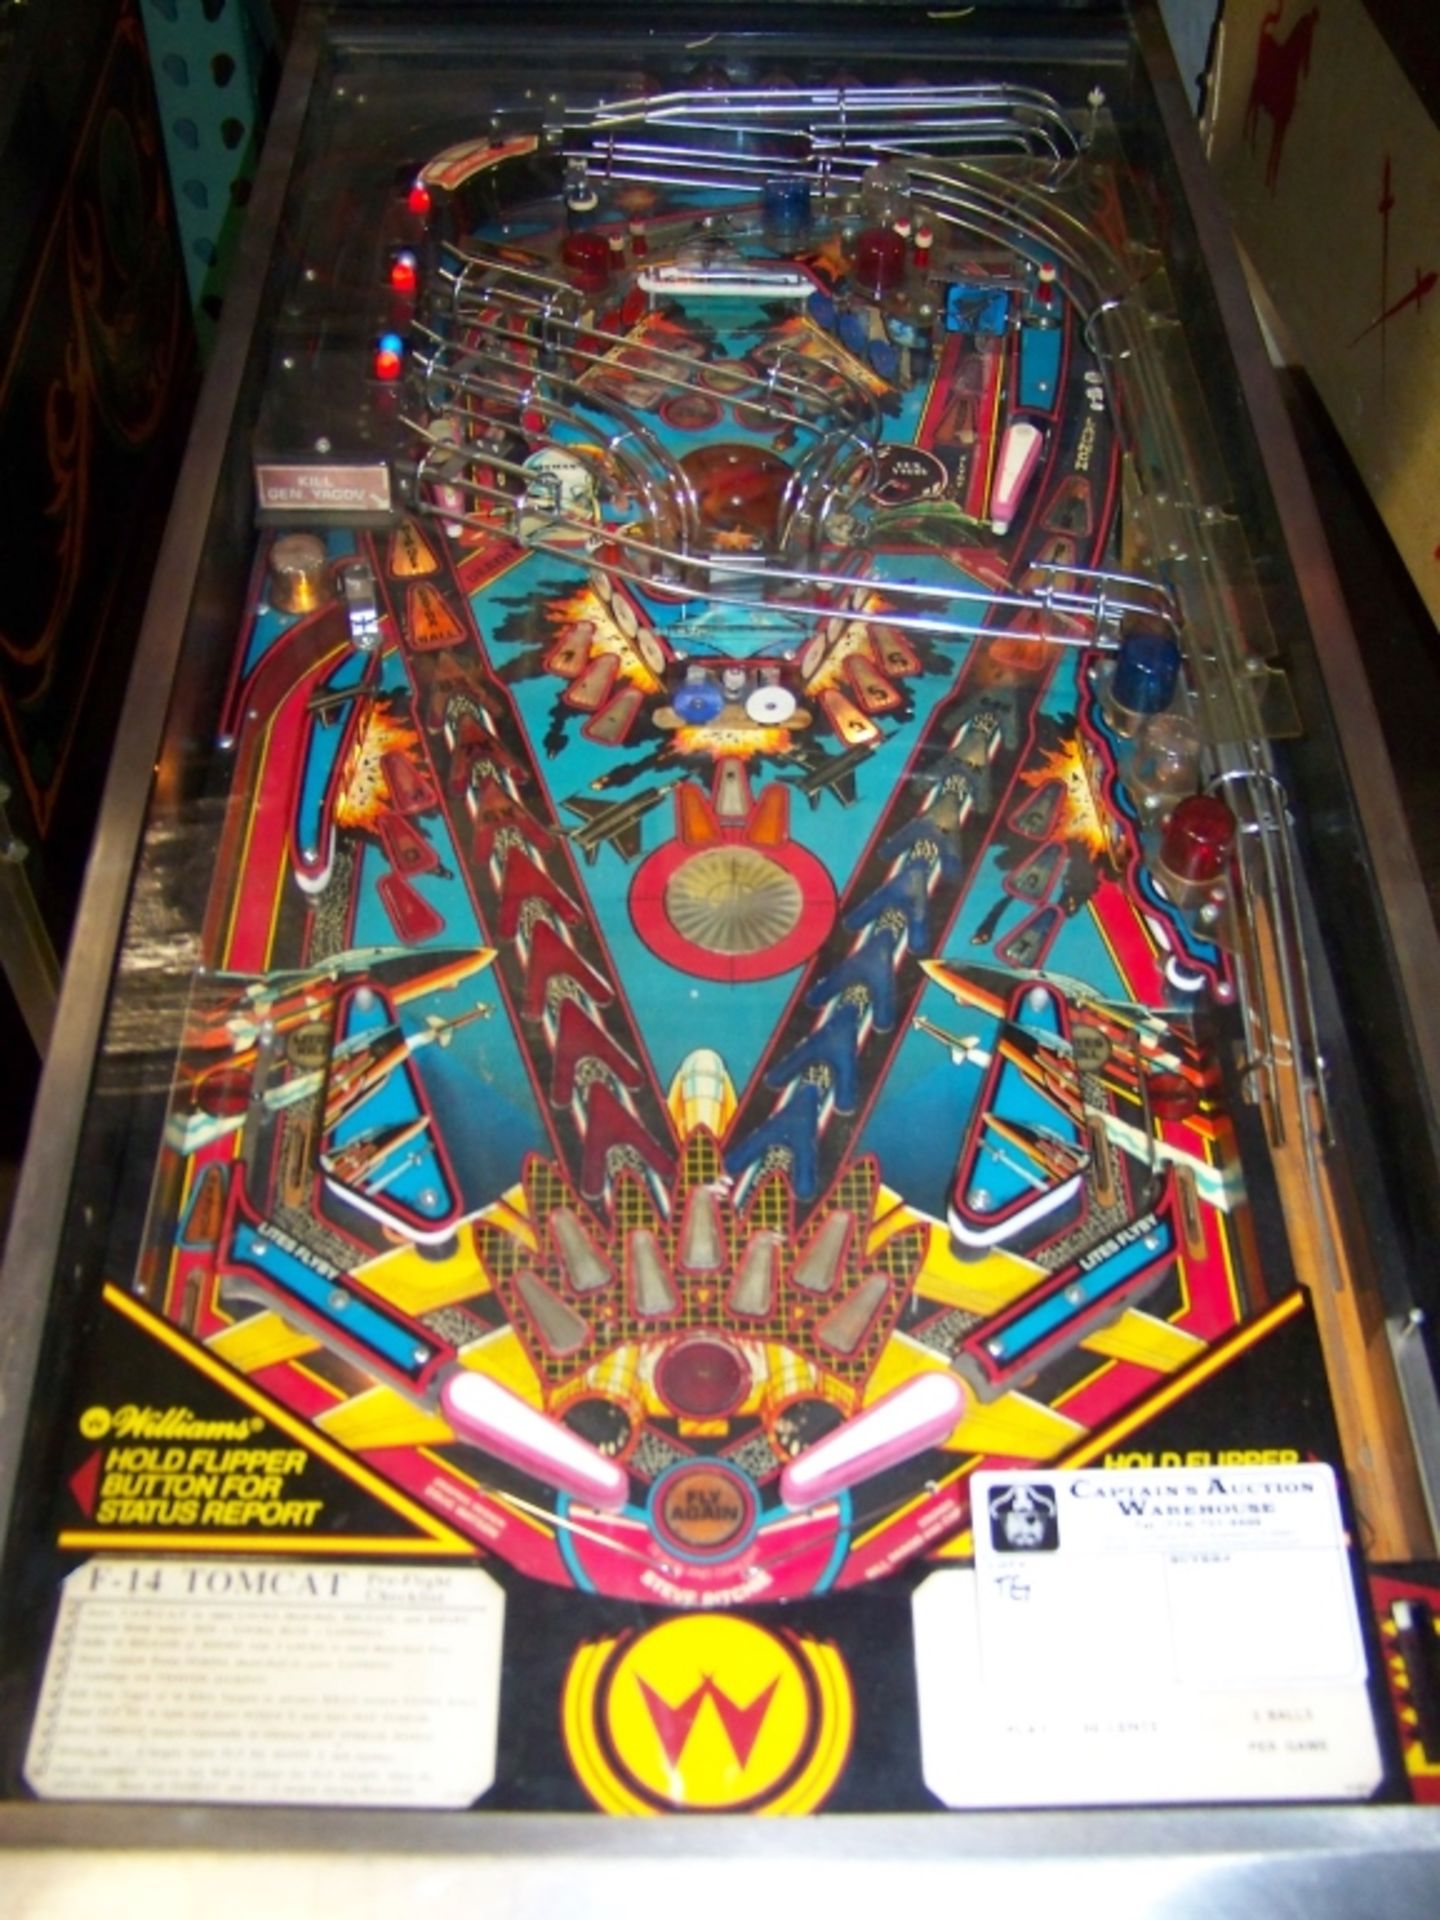 F-14 TOMCAT PINBALL MACHINE WILLIAMS 1987 Item is in used condition. Evidence of wear and commercial - Image 6 of 9